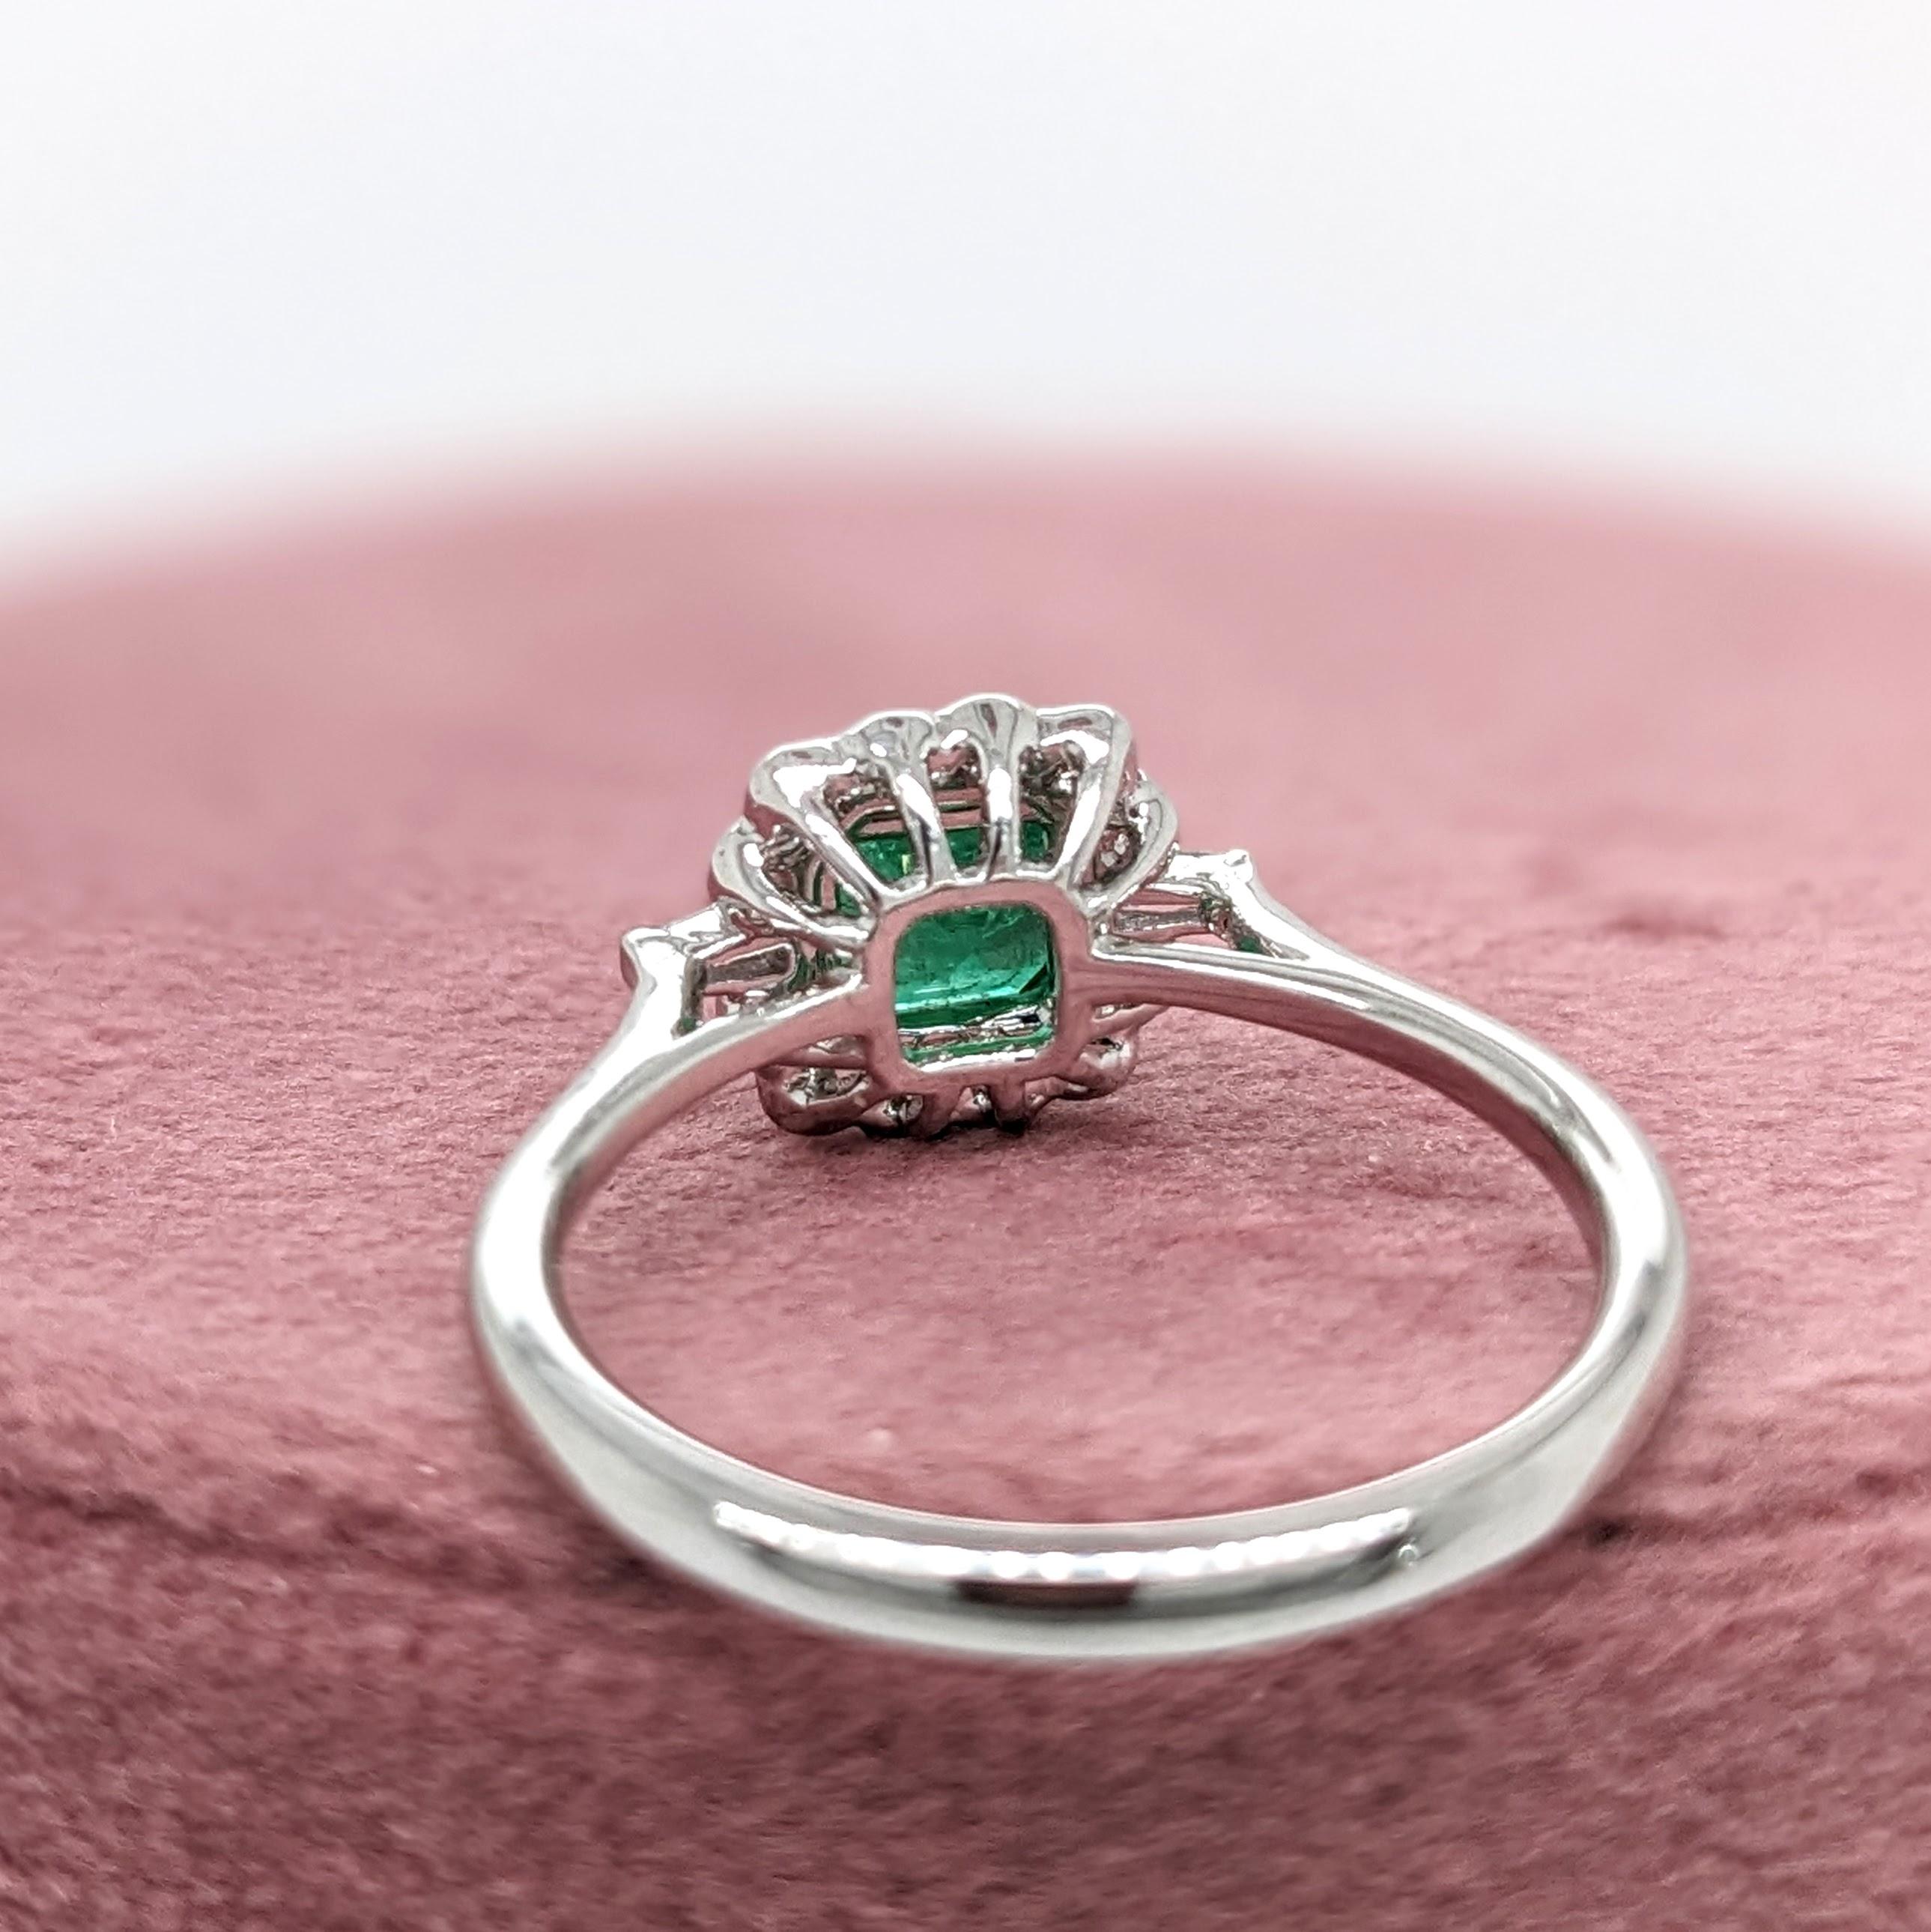 Emerald w Diamond Halo & Tapered Baguette Accents in 14K Gold Emerald Cut 5mm 1